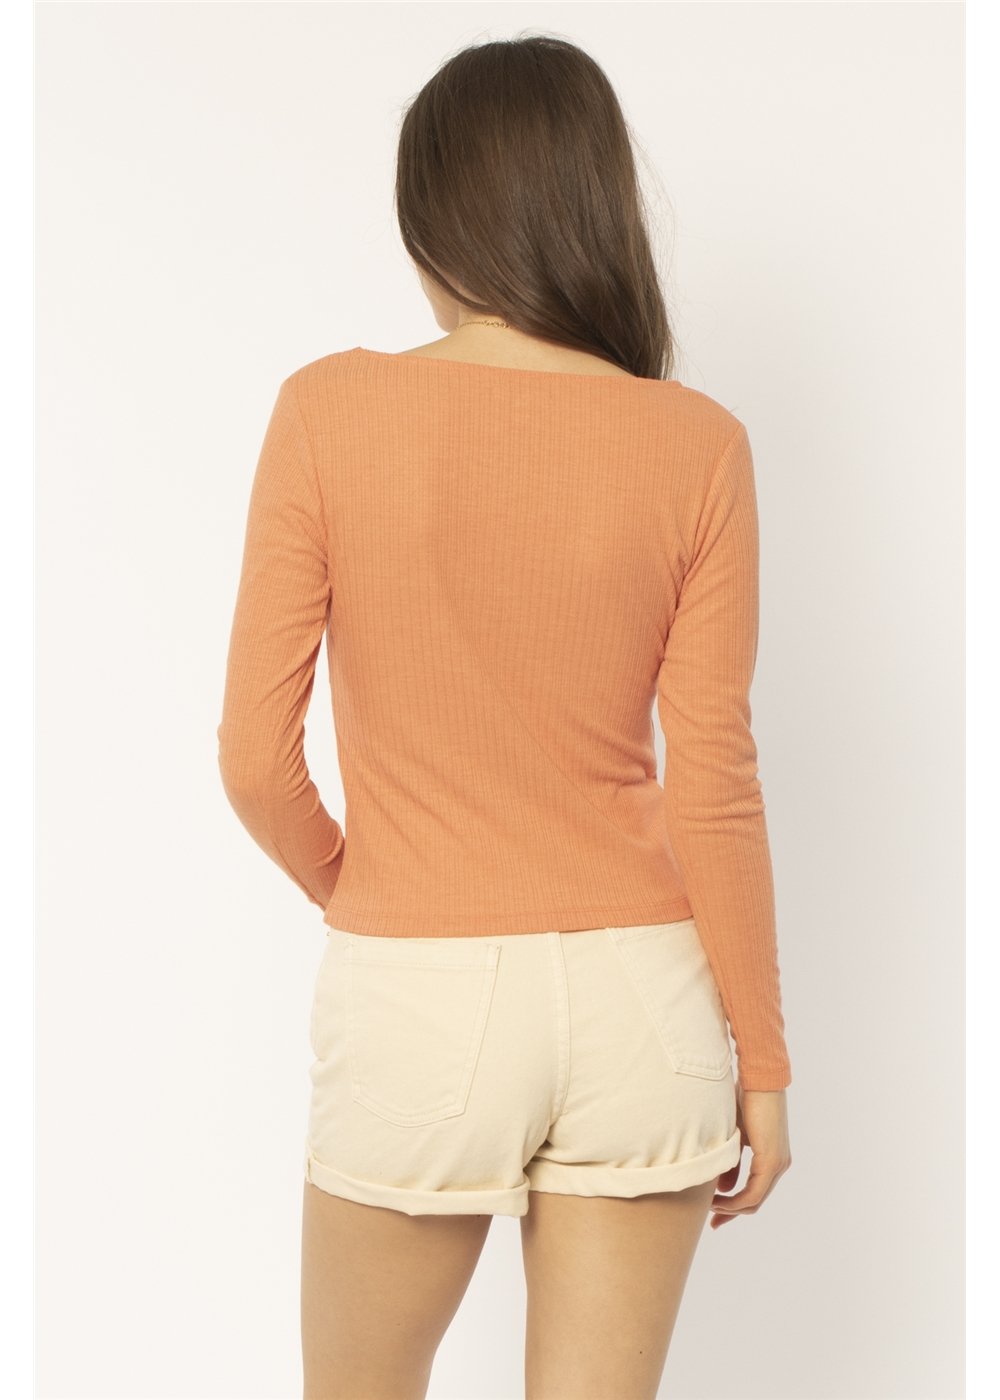 Amuse Society Women's Cayenne Quinn Long Sleeve knit top. Rear View